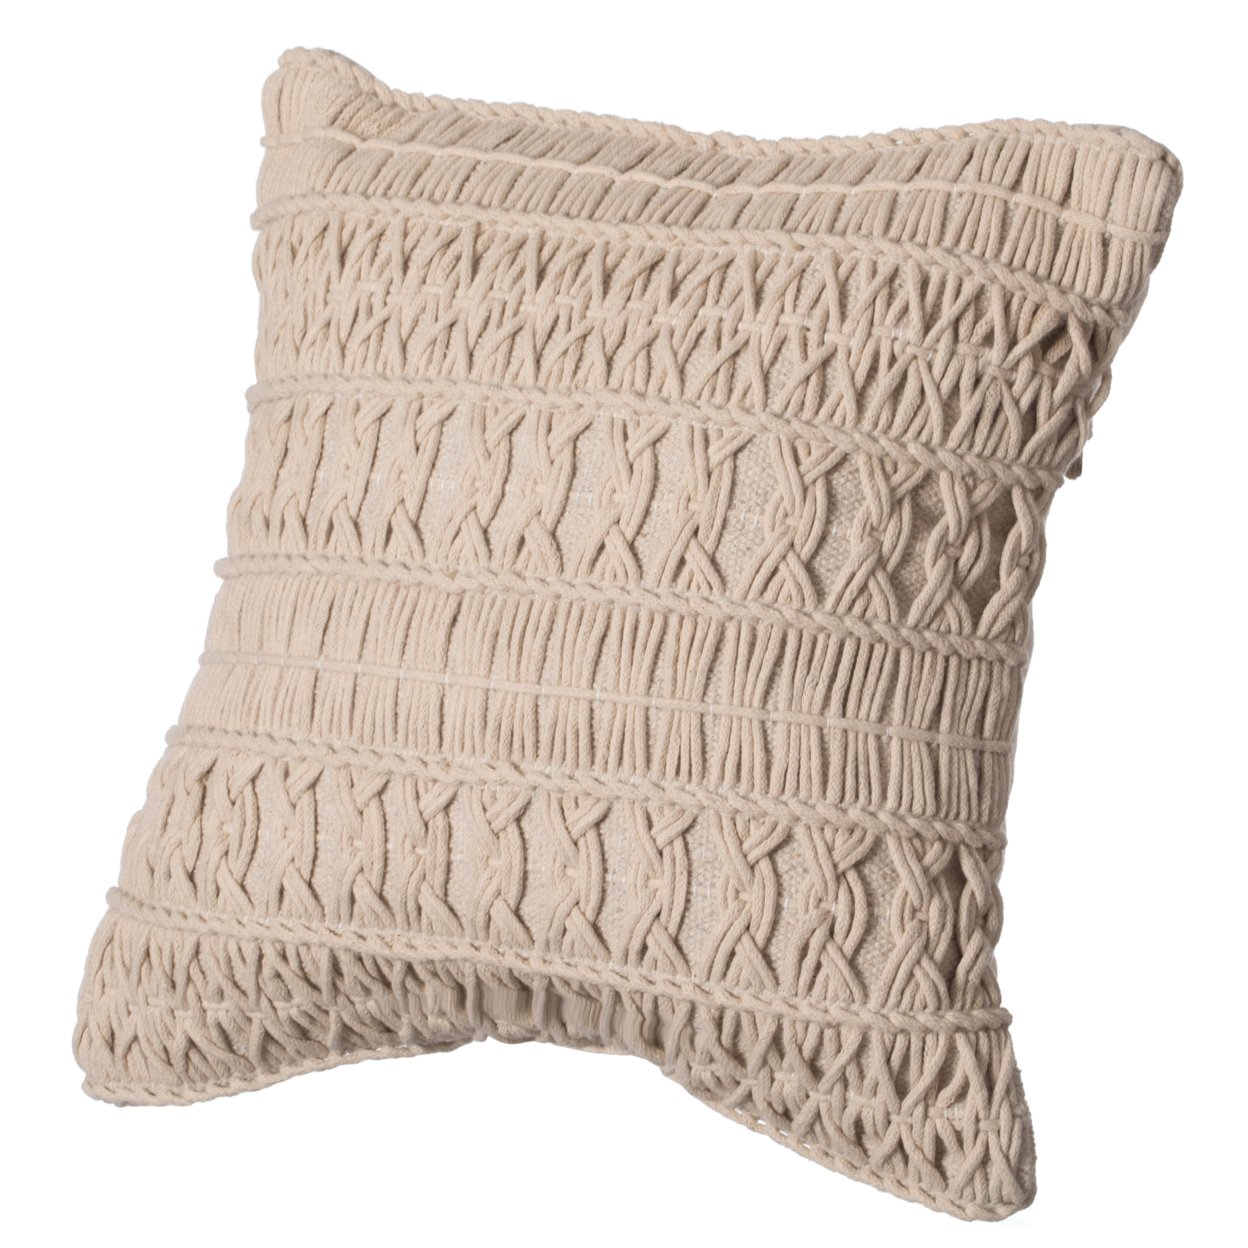 16" Handwoven Cotton Throw Pillow Cover with Layered Random String Pattern - pillowcase with cushion